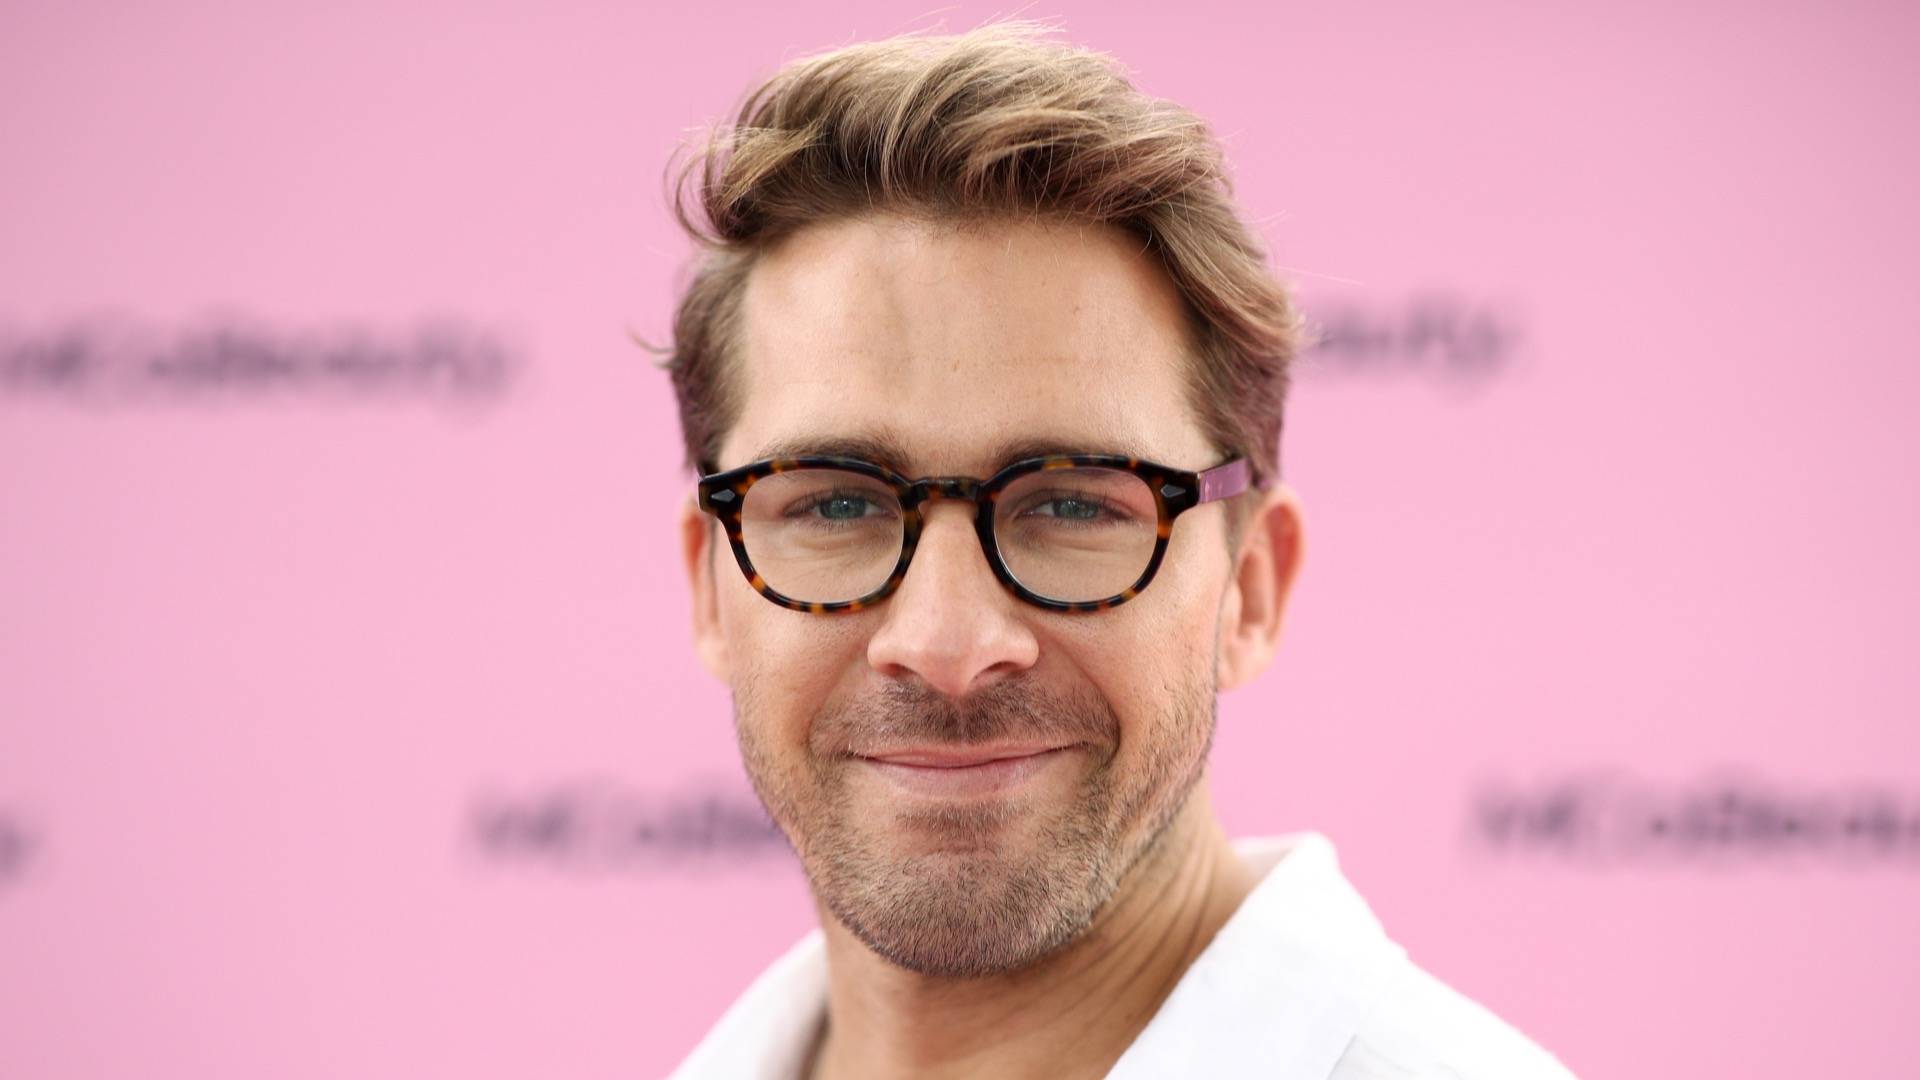 Australian actor Hugh Sheridan wearing plastic glasses and posing in front of pink background